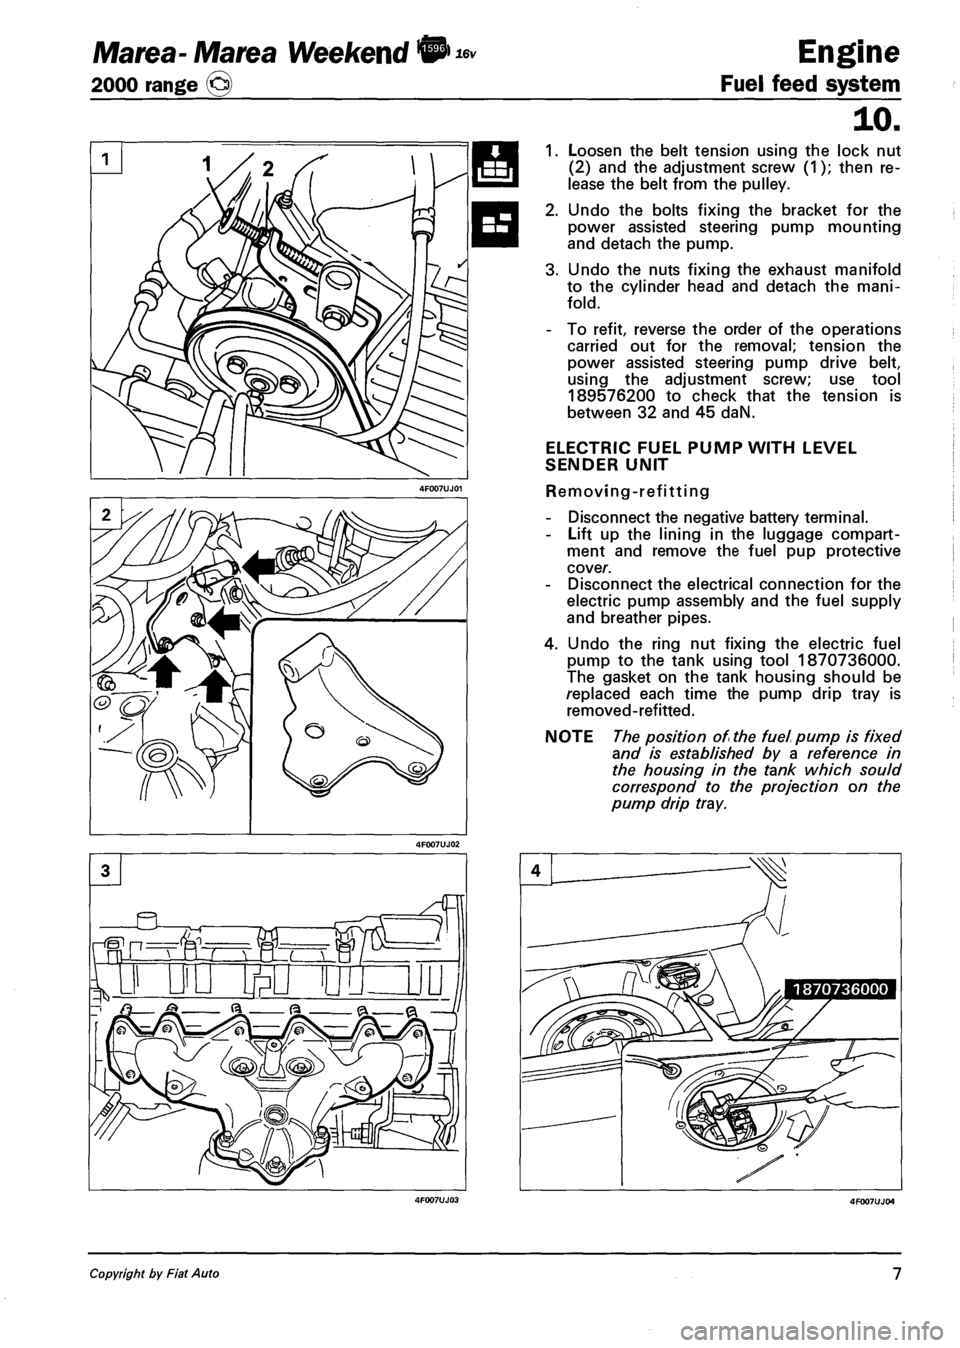 FIAT MAREA 2000 1.G Workshop Manual Marea- Marea Weekend • 
2000 range © 
16v Engine 
Fuel feed system 
10. 
1. Loosen the belt tension using the lock nut 
(2) and the adjustment screw (1); then re­
lease the belt from the pulley. 
